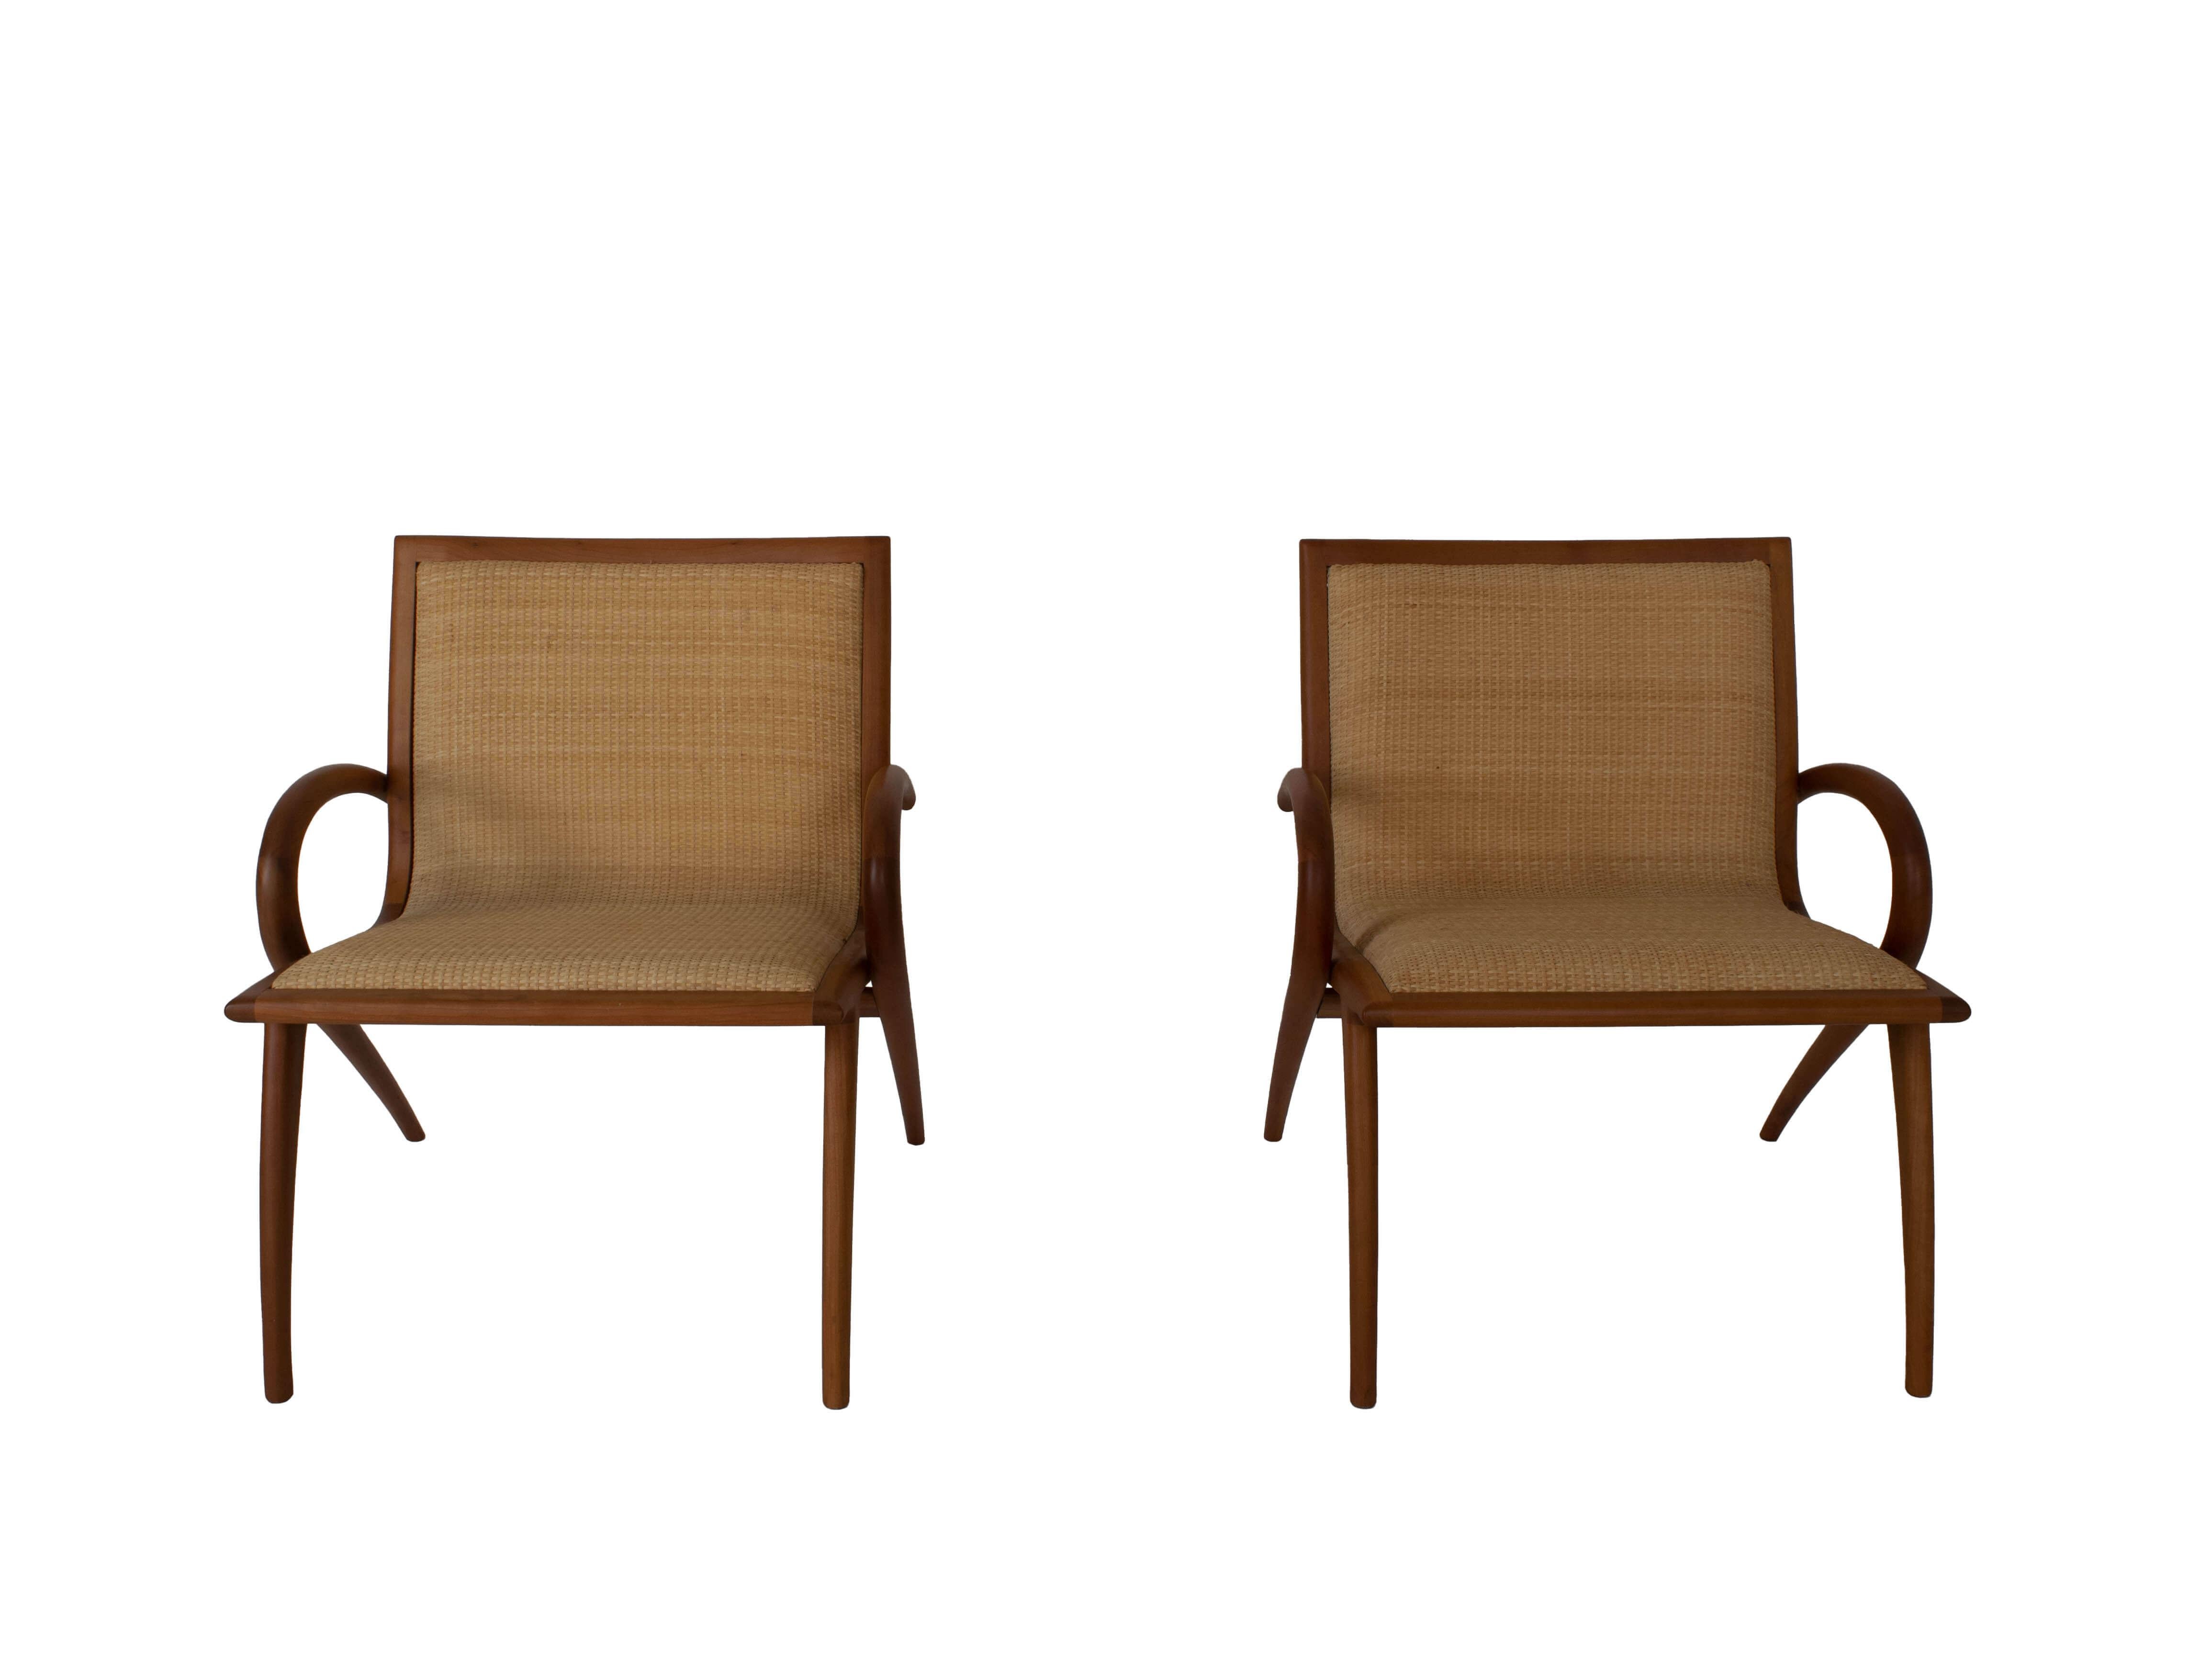 Mid-Century Modern Set of Two Arm Chairs by John Graz, Designed in Brazil 1950s